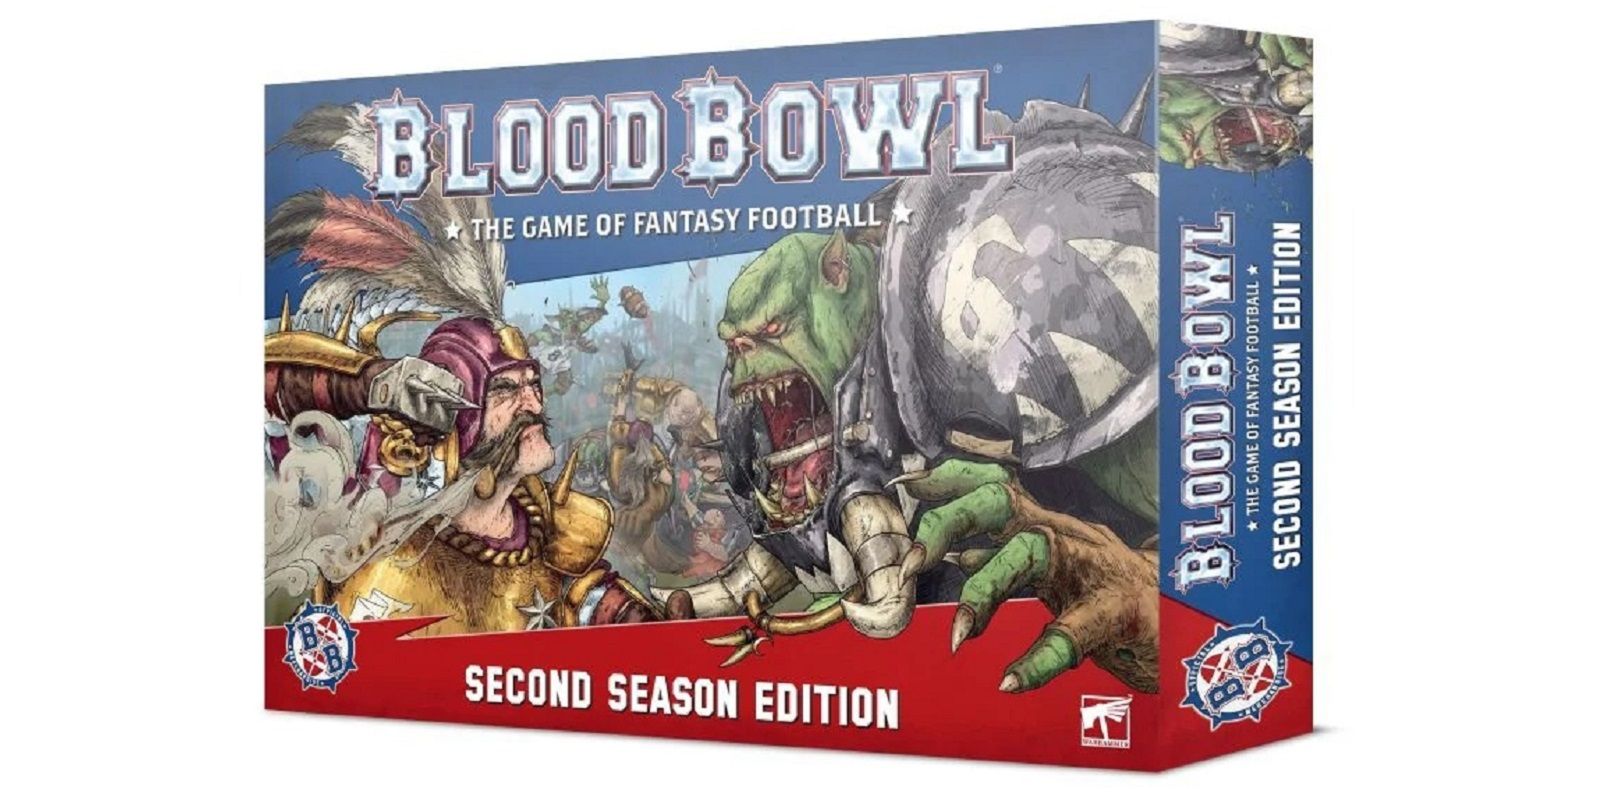 Blood Bowl 3 Needs To Be More Diverse